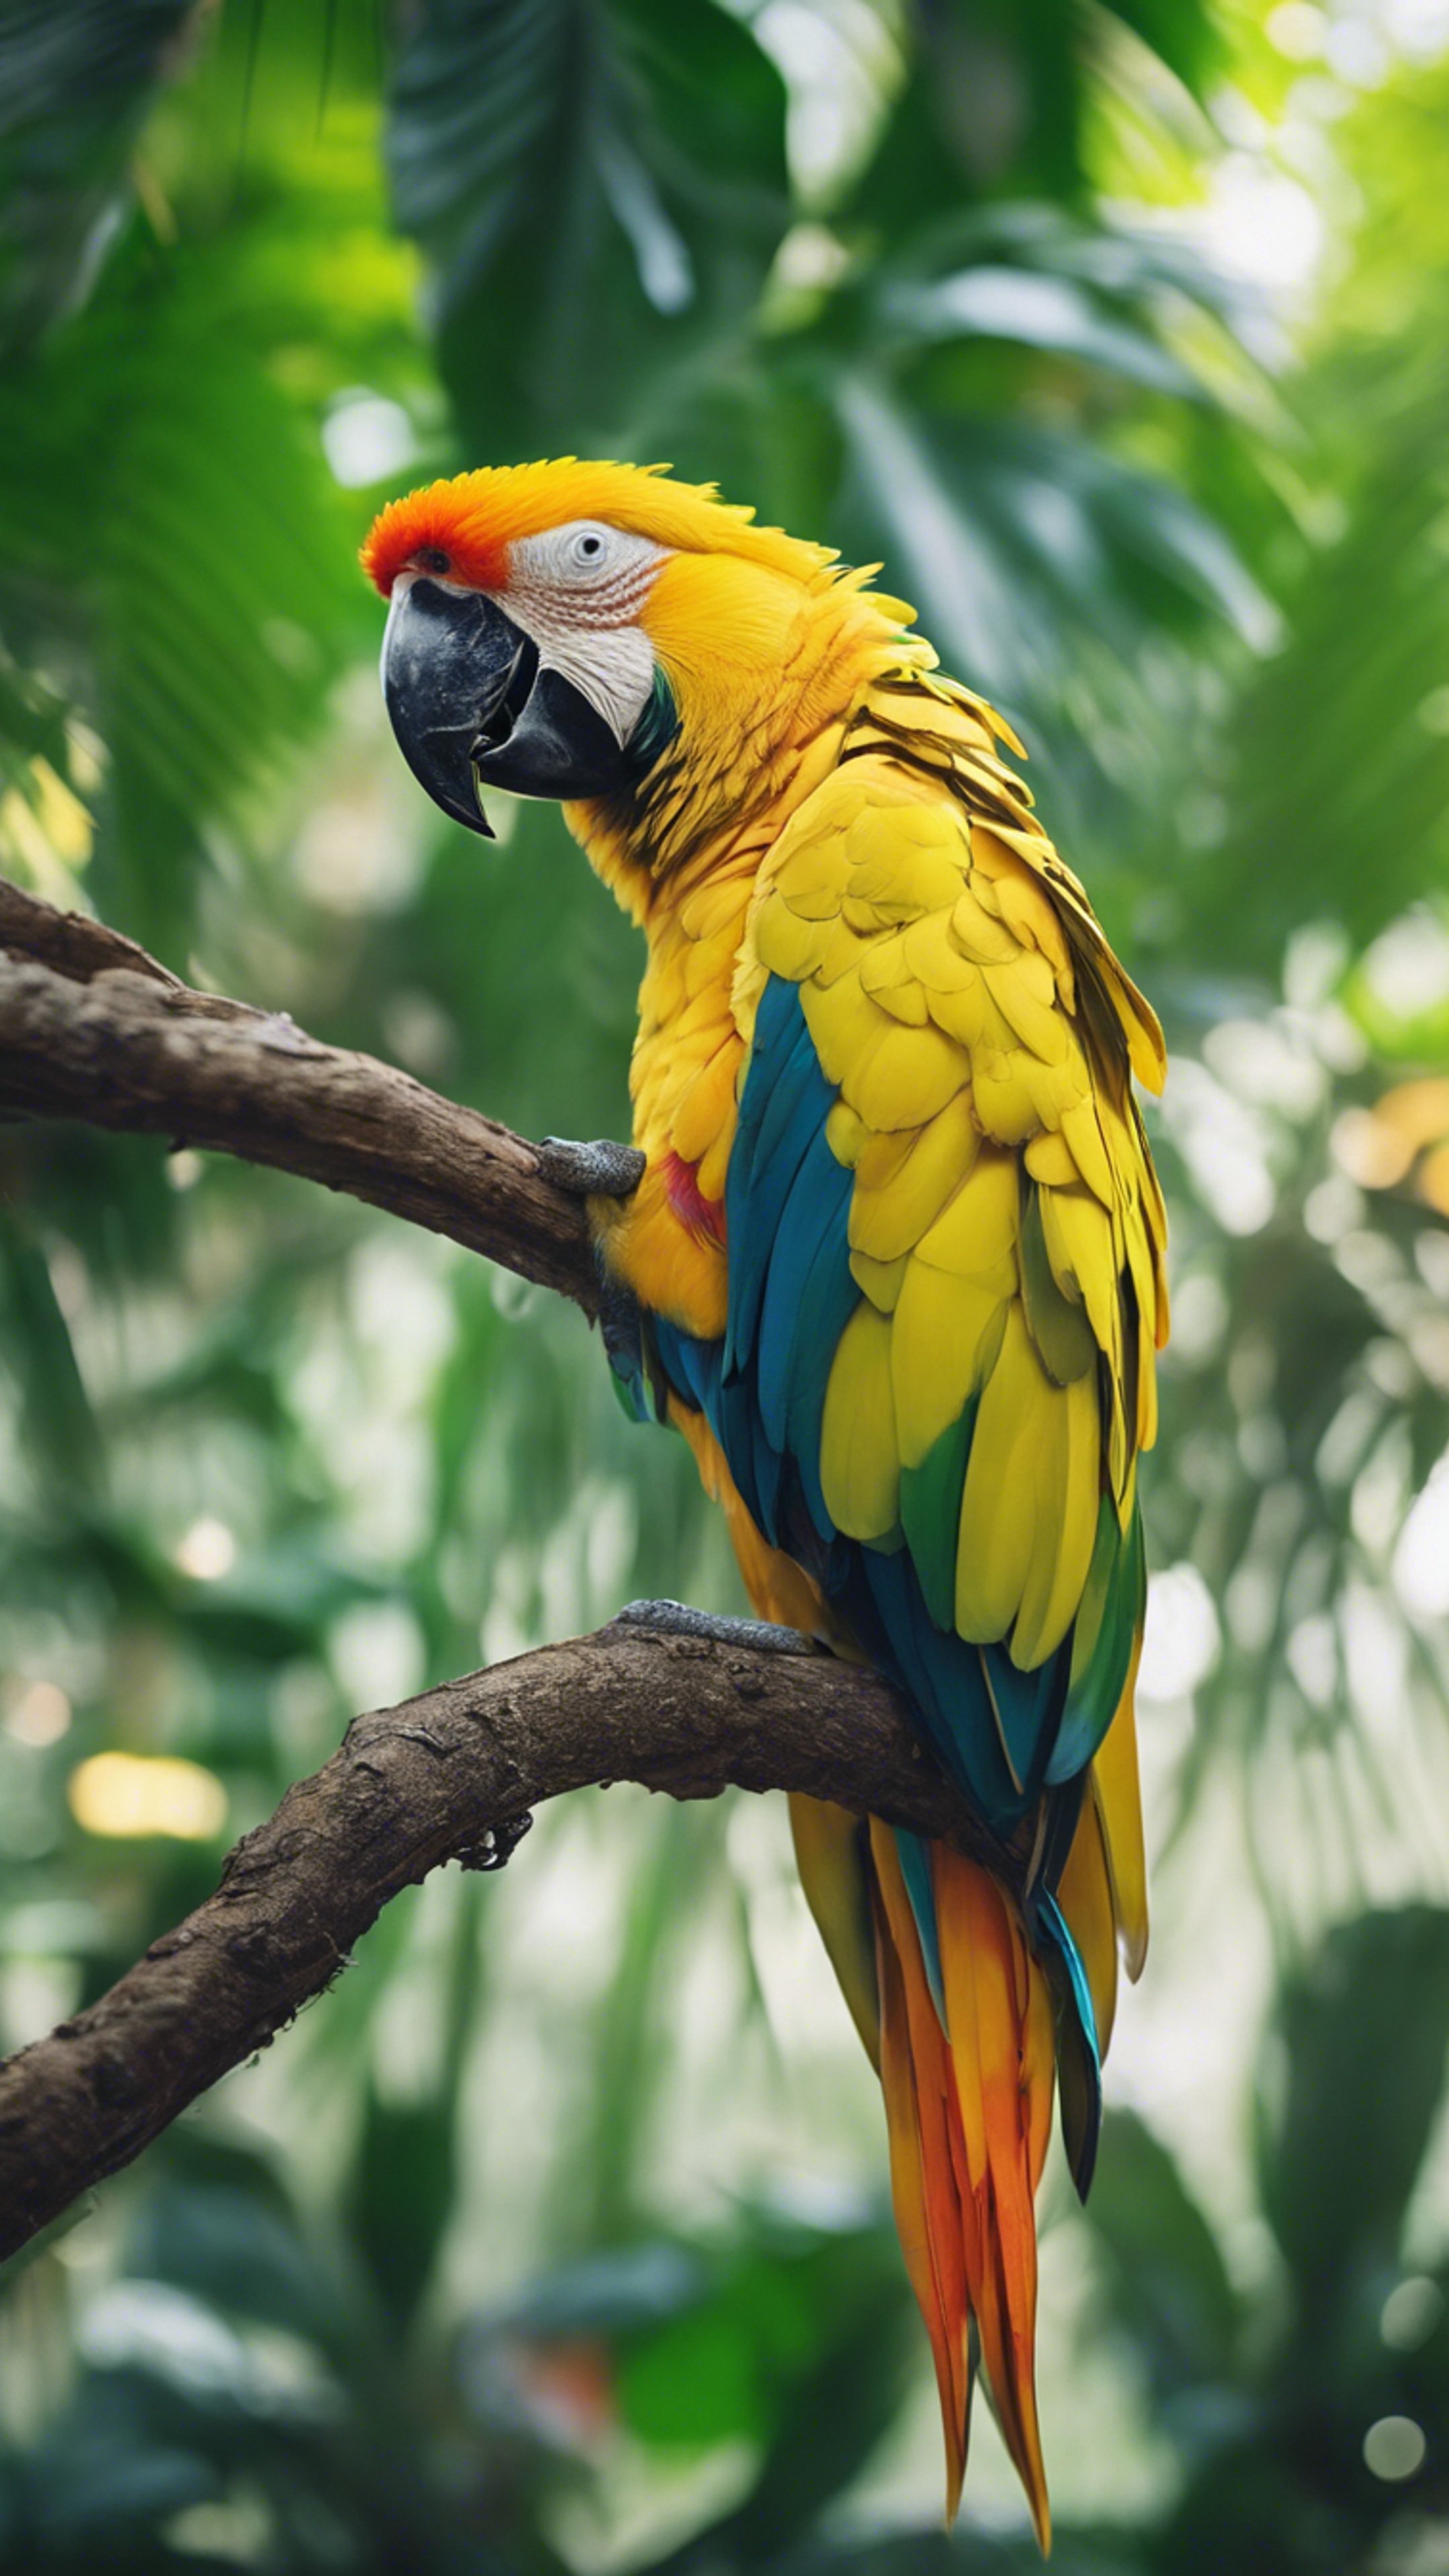 A vibrant neon yellow parrot perched on a branch in a dense jungle. Wallpaper[c7d23c021a074c95944c]